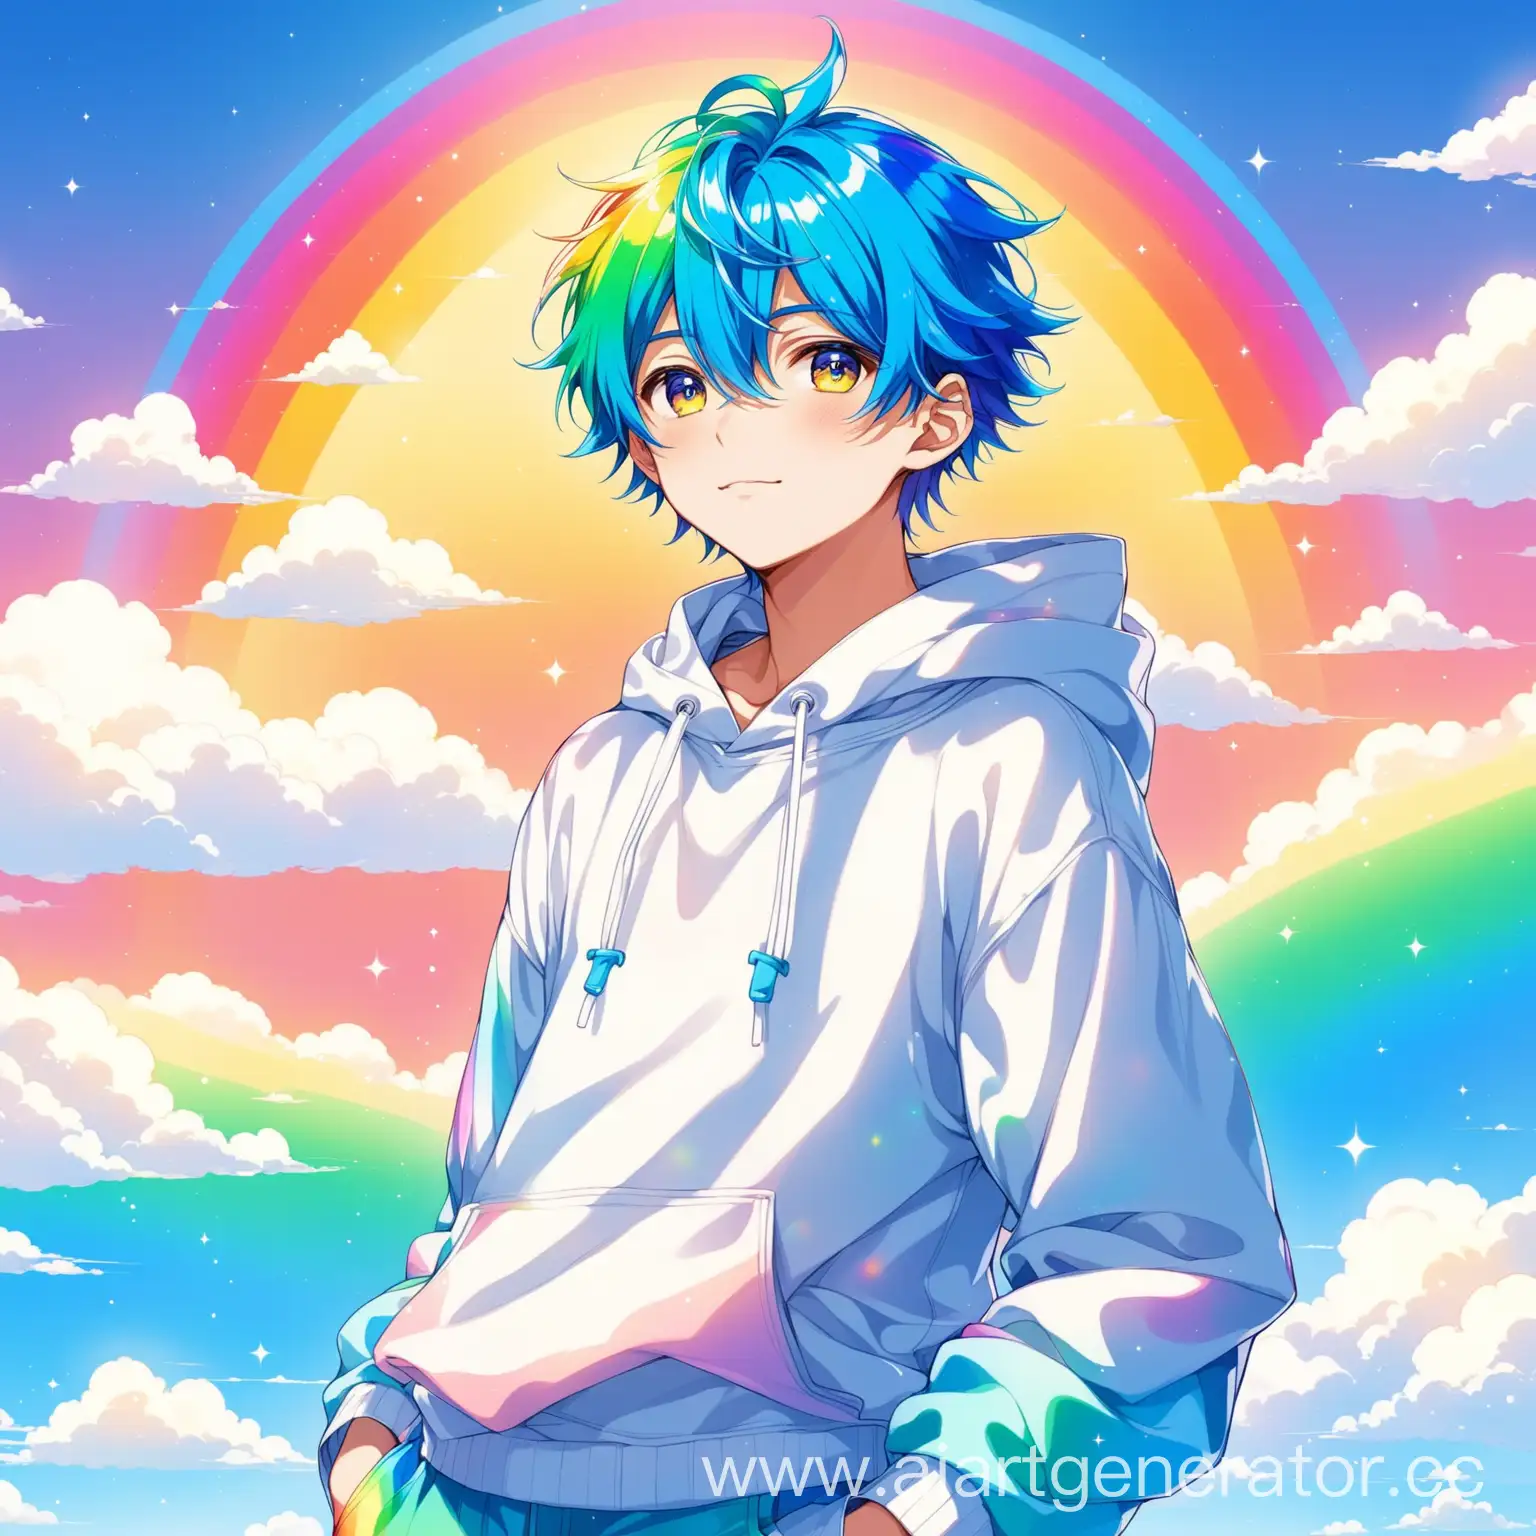 Colorful-Anime-Boy-with-Blue-Hair-in-Rainbow-Cloud-Style-Outfit